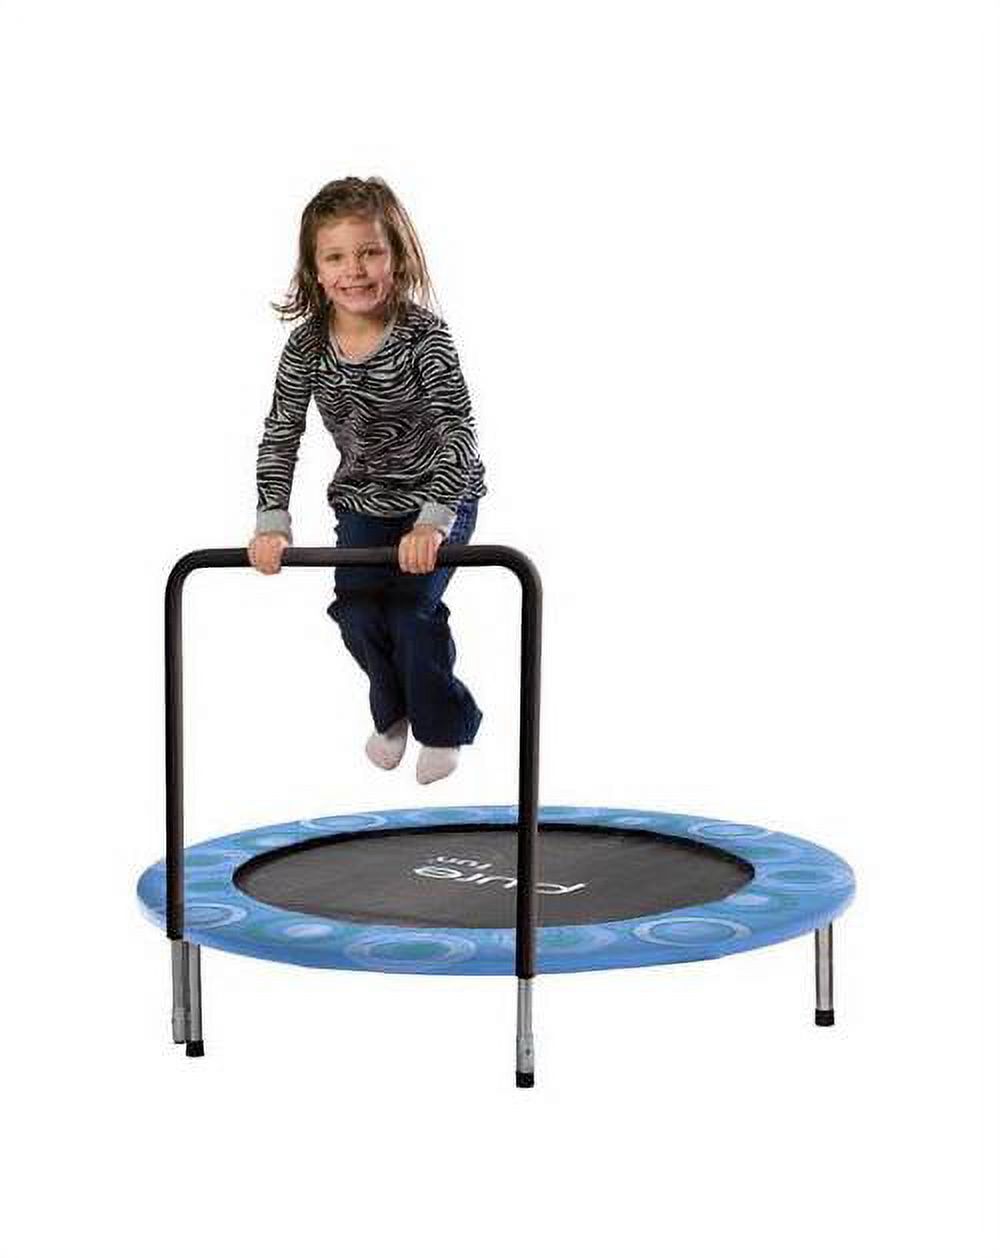 Pure Fun 48-Inch Super Jumper Kids Trampoline with Handrail, Blue, 100lb Weight Limit - image 3 of 6